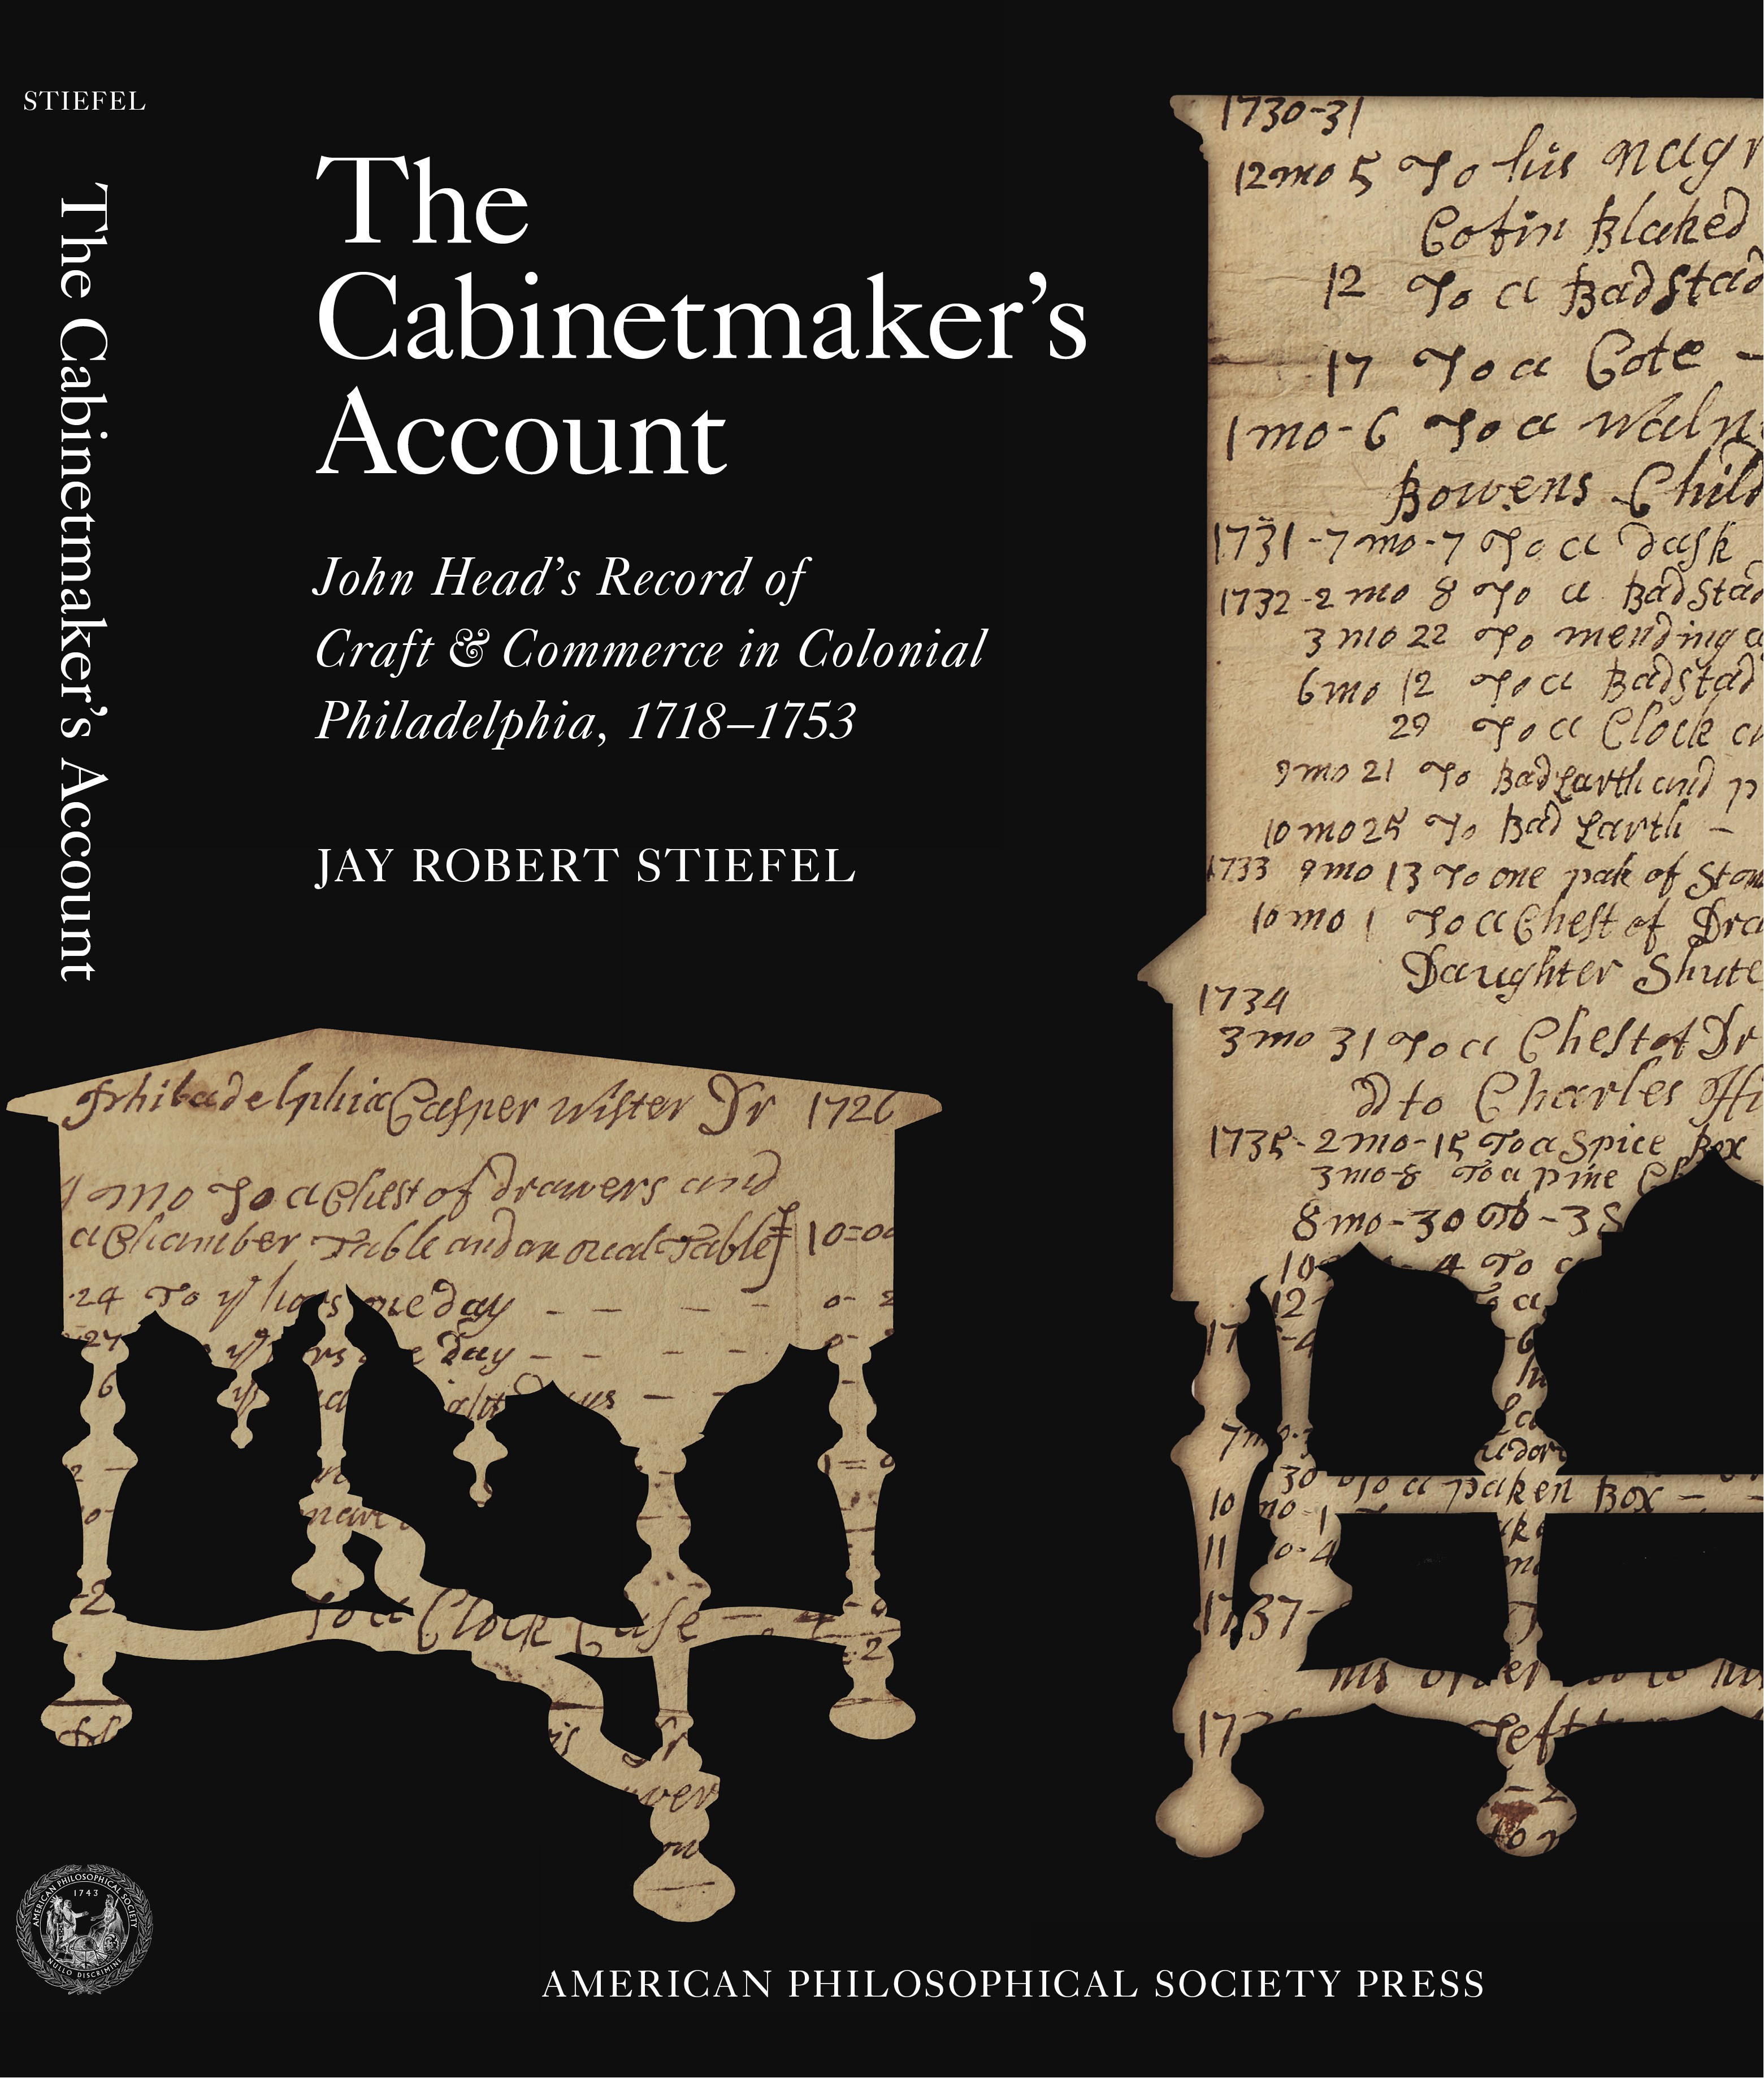 The Cabinetmaker's Account